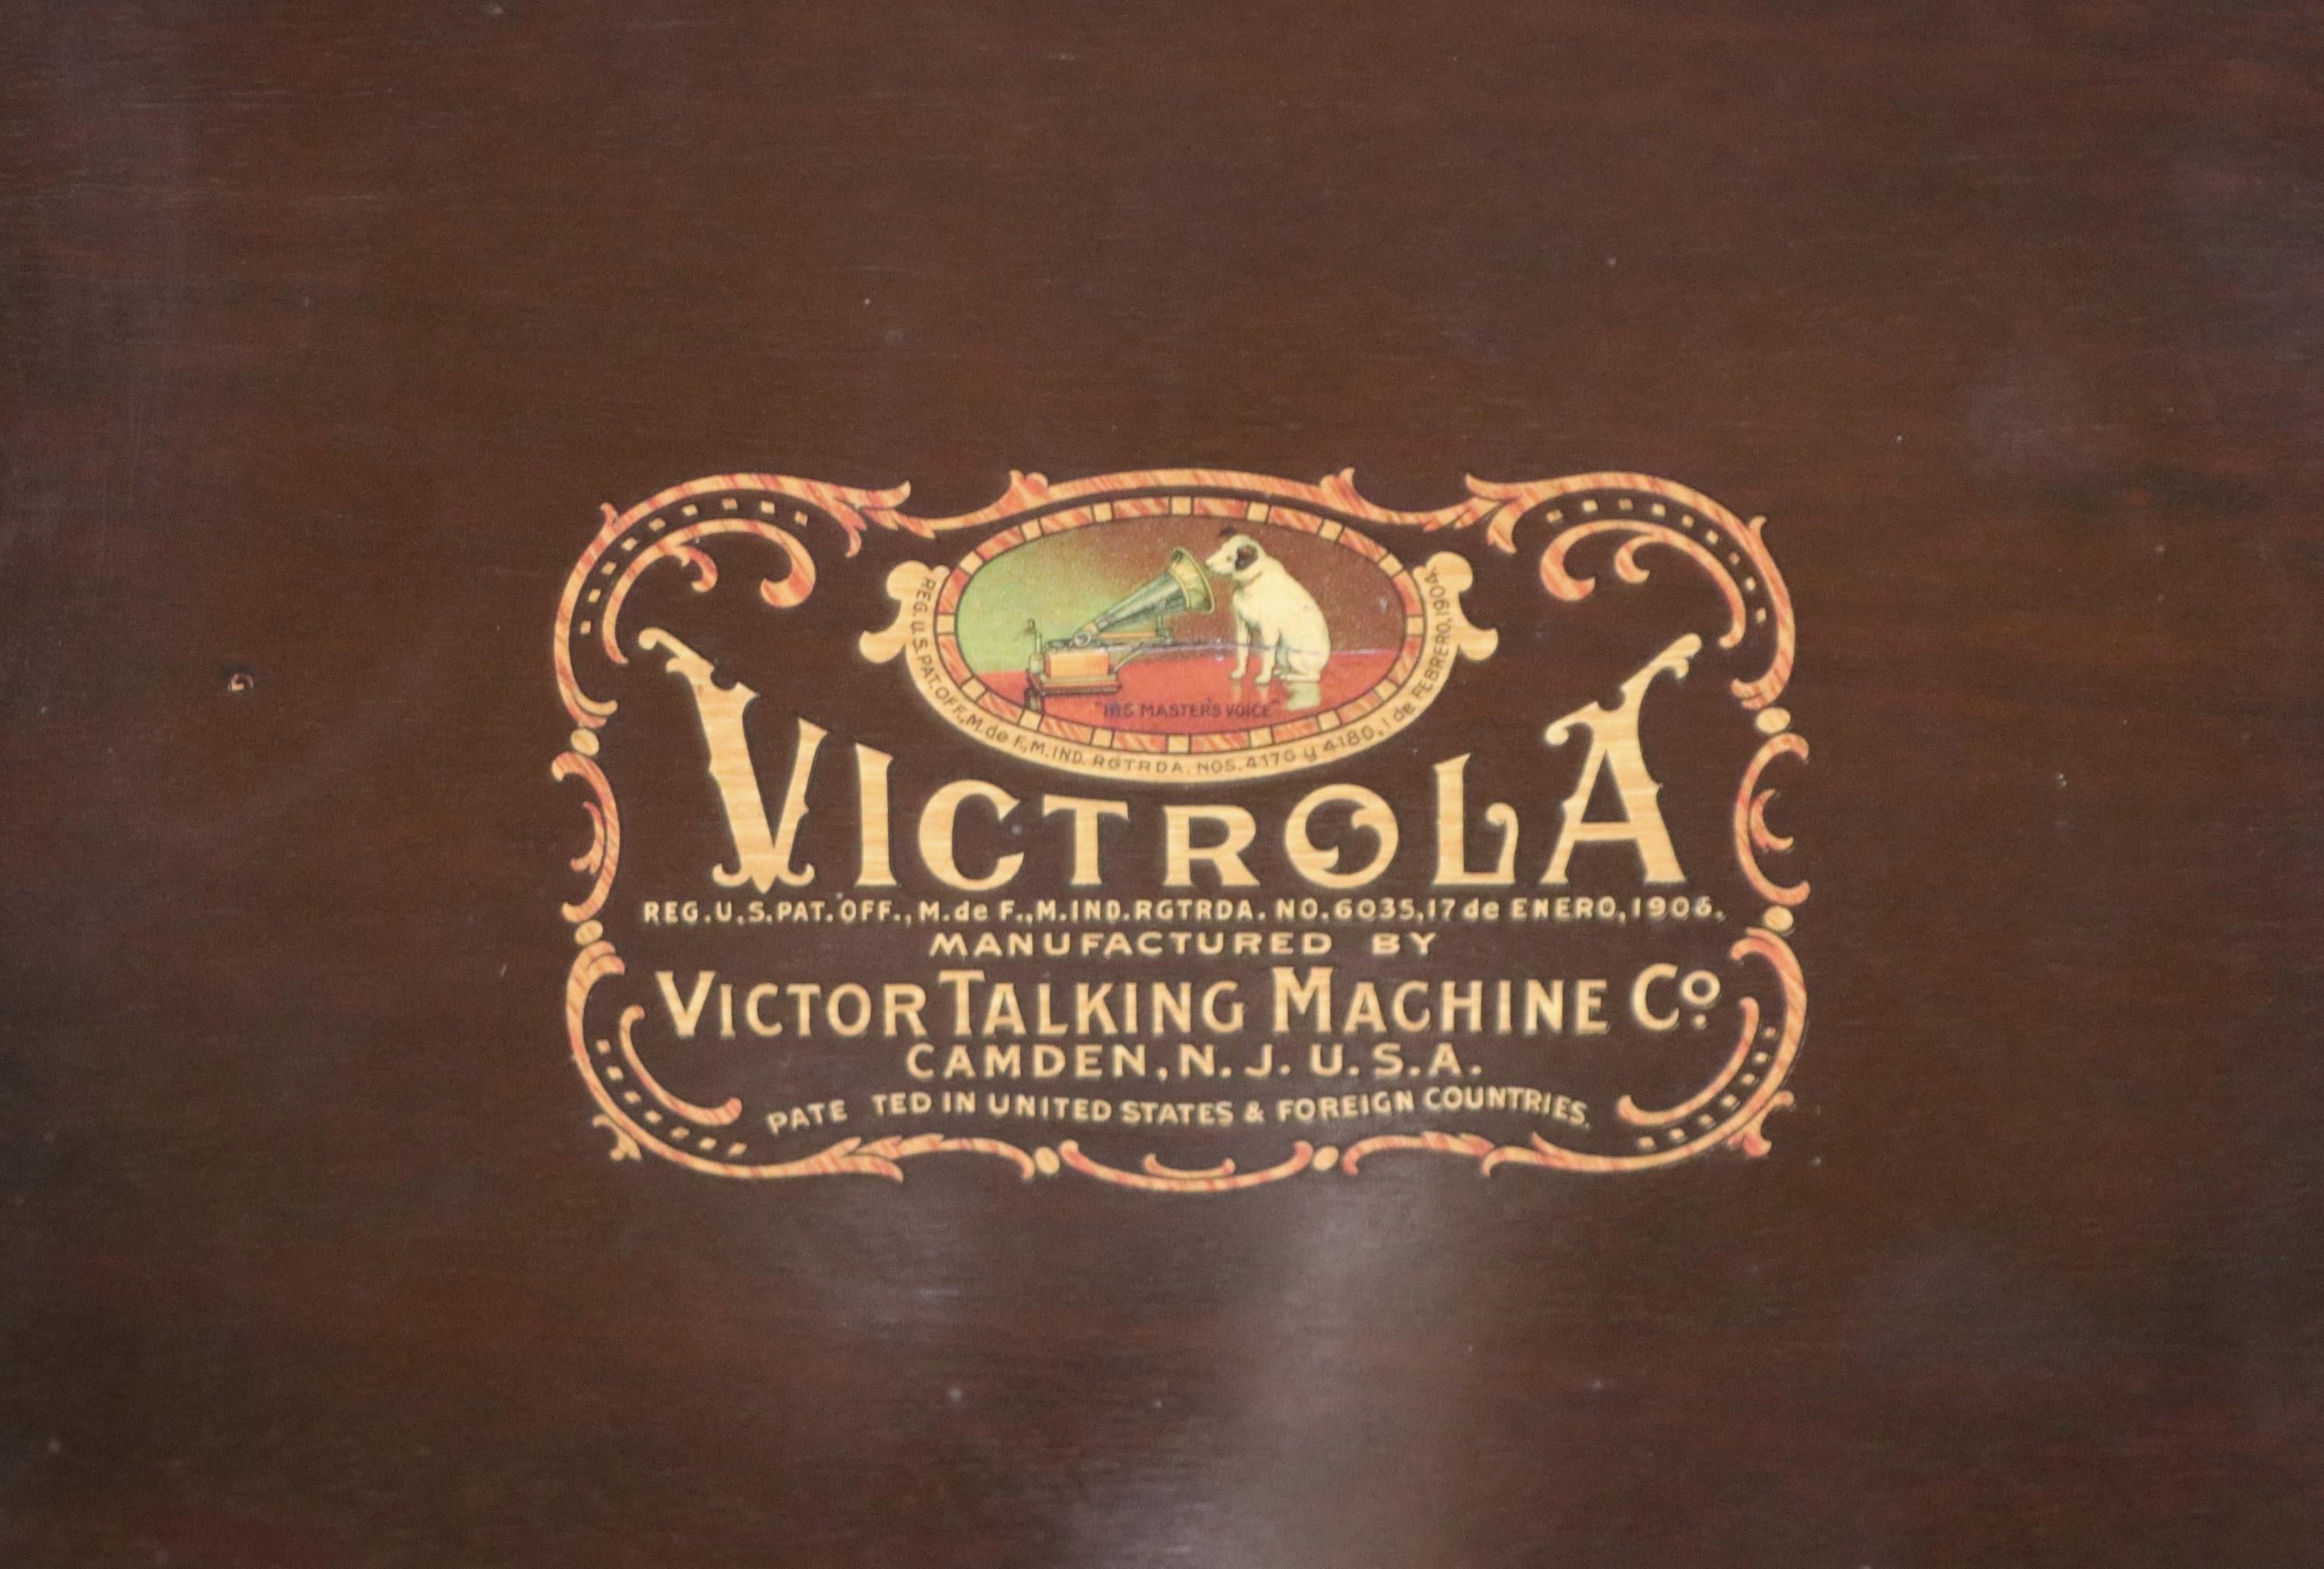 Antique VV-80 Floor-Model Victrola Phonograph. It was manufactured by The Victrola Victor Talking Machine Company, Model VV-80 155529.  The phonograph has a dark-tone wood cabinet underneath with a wood lid. This Victrola Victor talking machine is